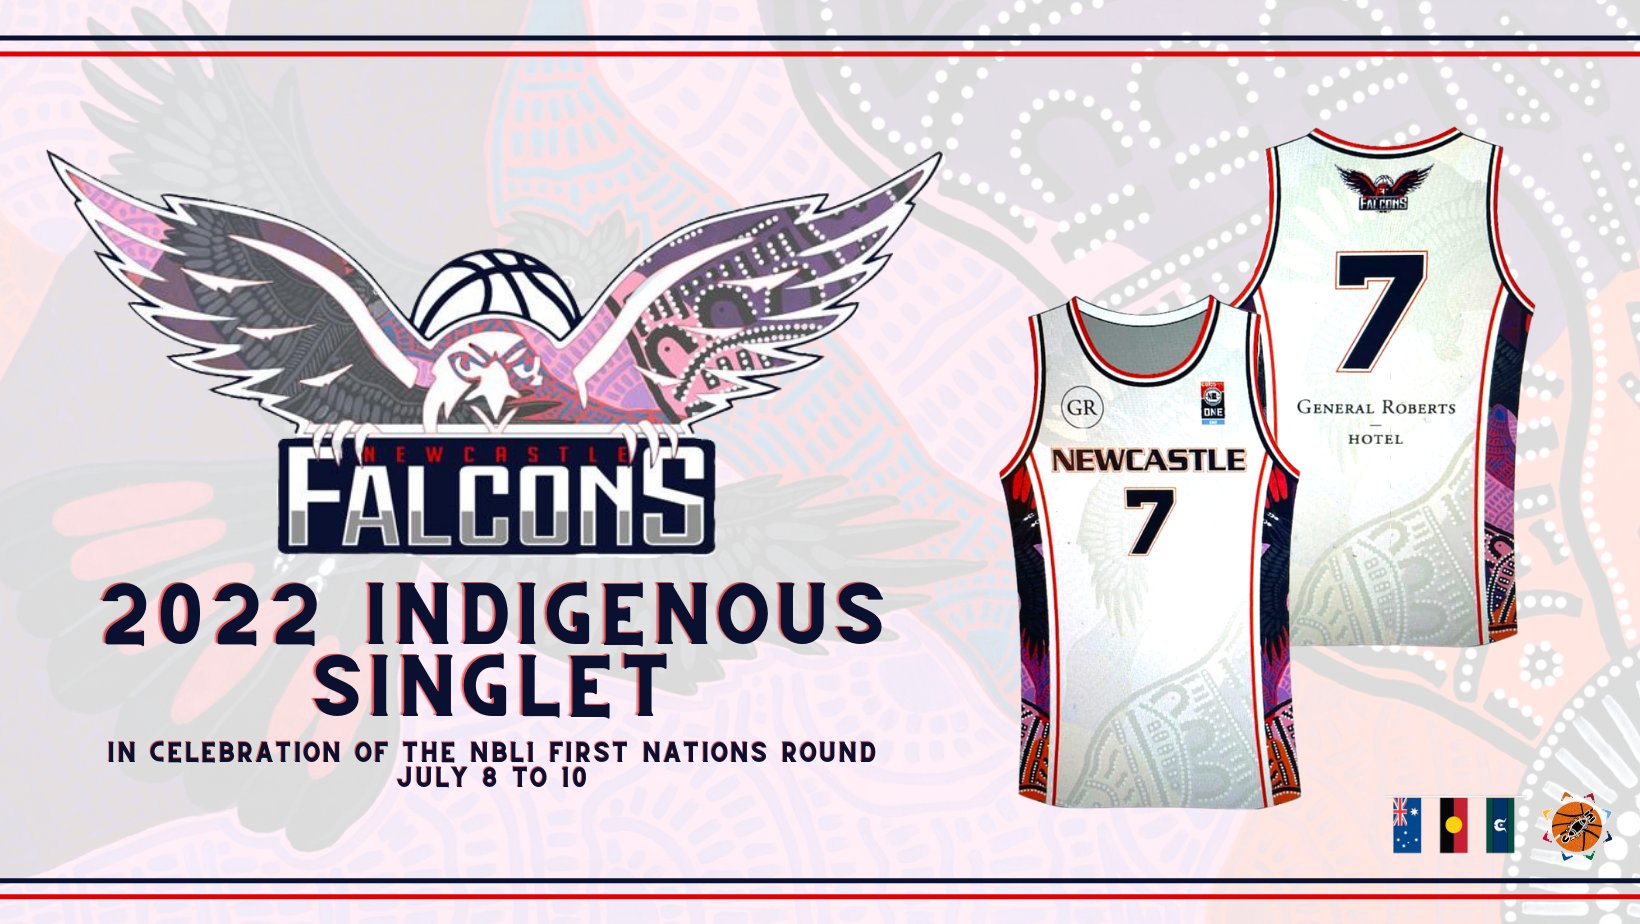 Newcastle Basketball on X: As part of @NBL1 Indigenous Round, our  Newcastle Falcons @NBL1East teams will wear these specially designed jerseys  against @HillsHornets at @NewyBasketball Stadium this Sat, July 9. NBL1 will